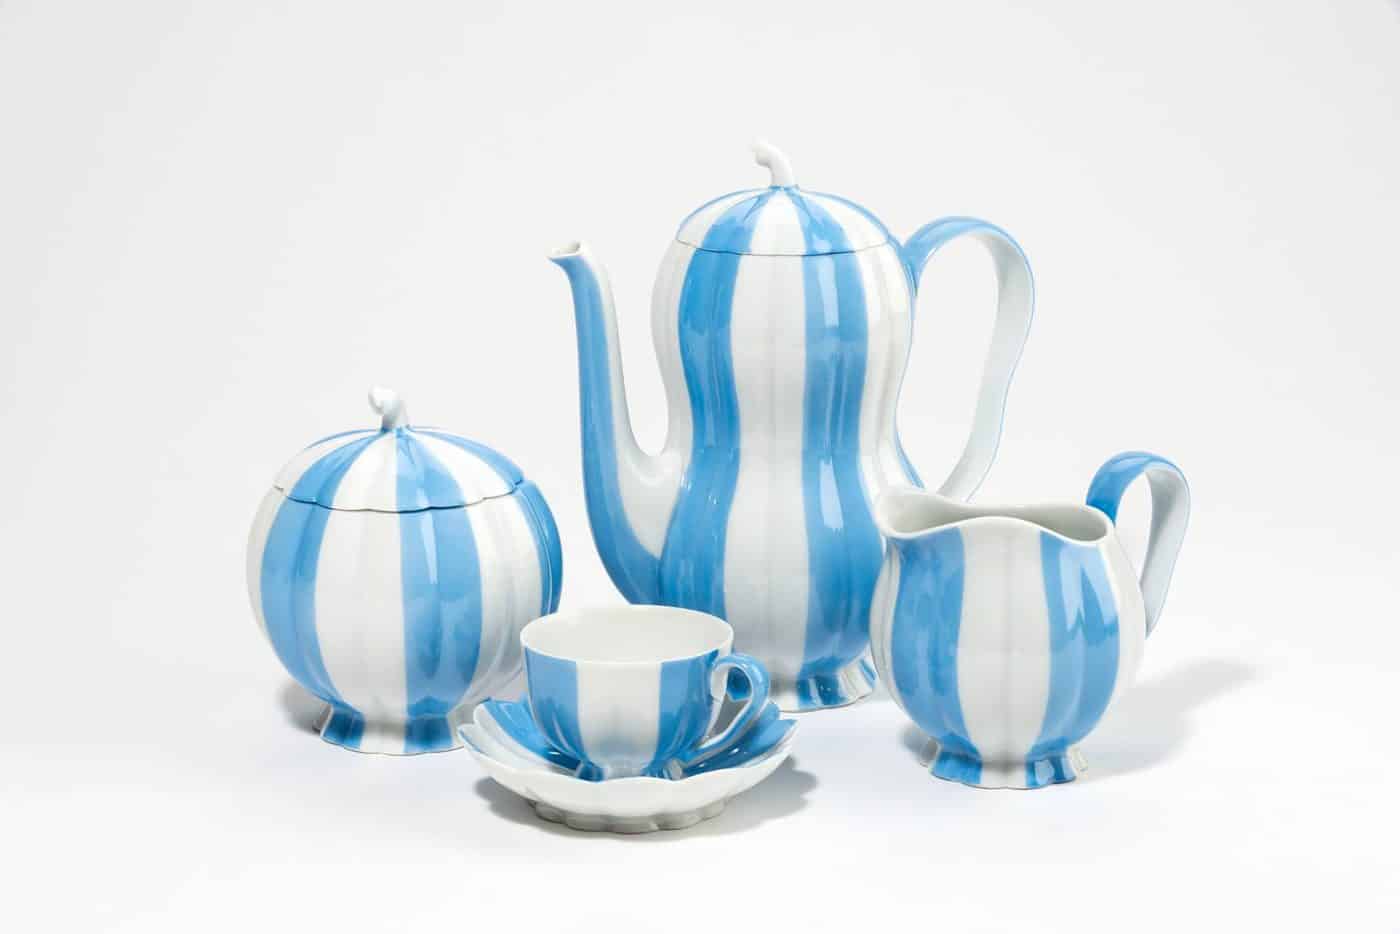 Hoffmann's melon-shaped mocha service was produced by the Vienna Porcelain Manufactory Augarten in 1929